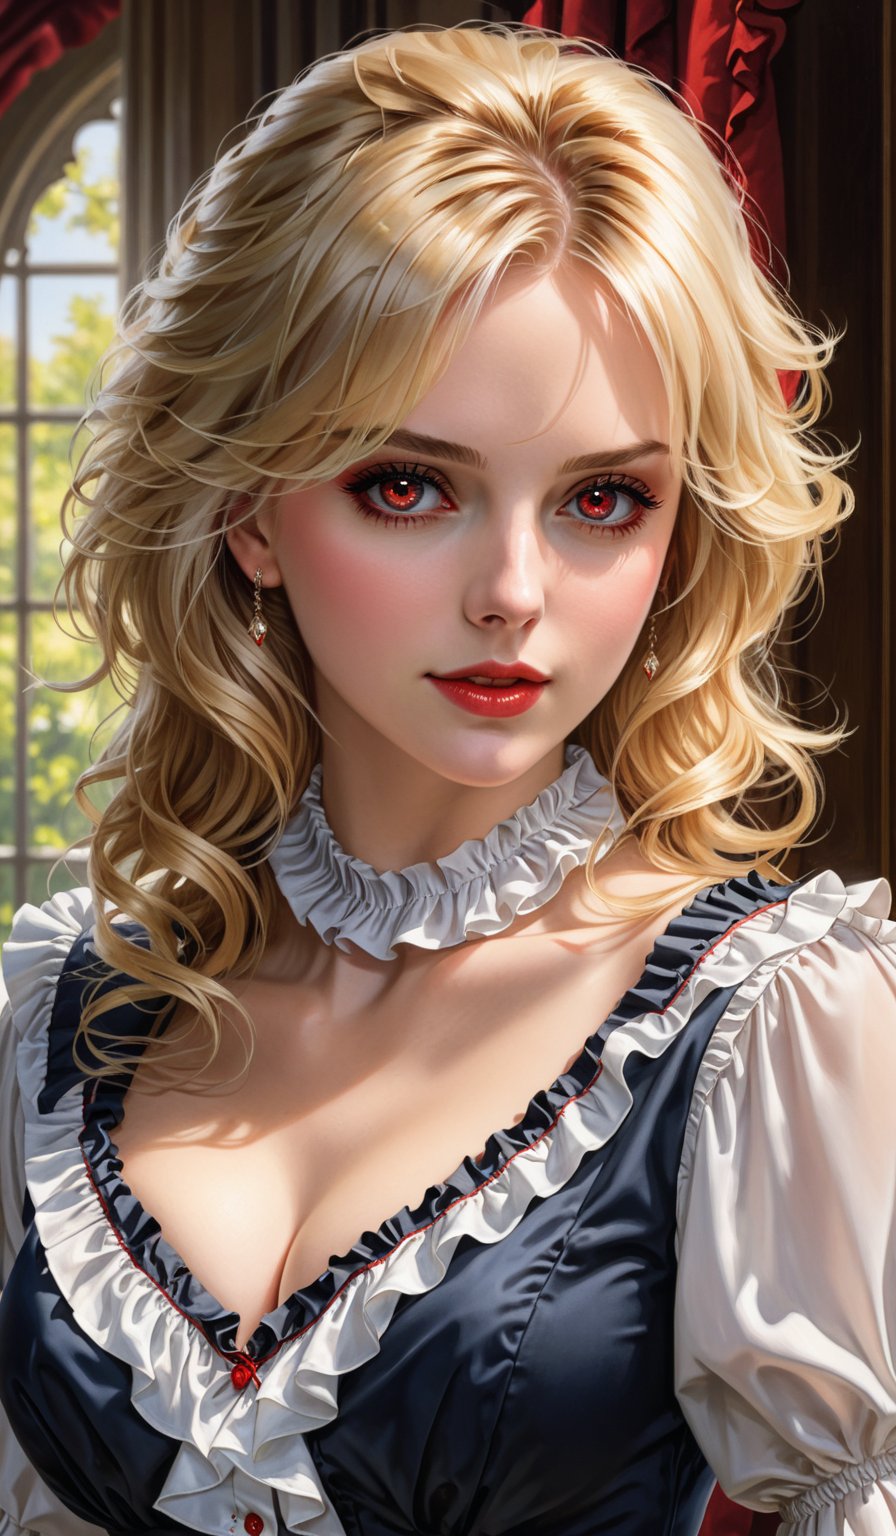 score_9, score_8_up, score_7_up, score_6_up, masterpiece,best quality,illustration,style of Realistic portrait of woman,Frilled Blouse,Blonde hair,red Eyes,cleavage cutout